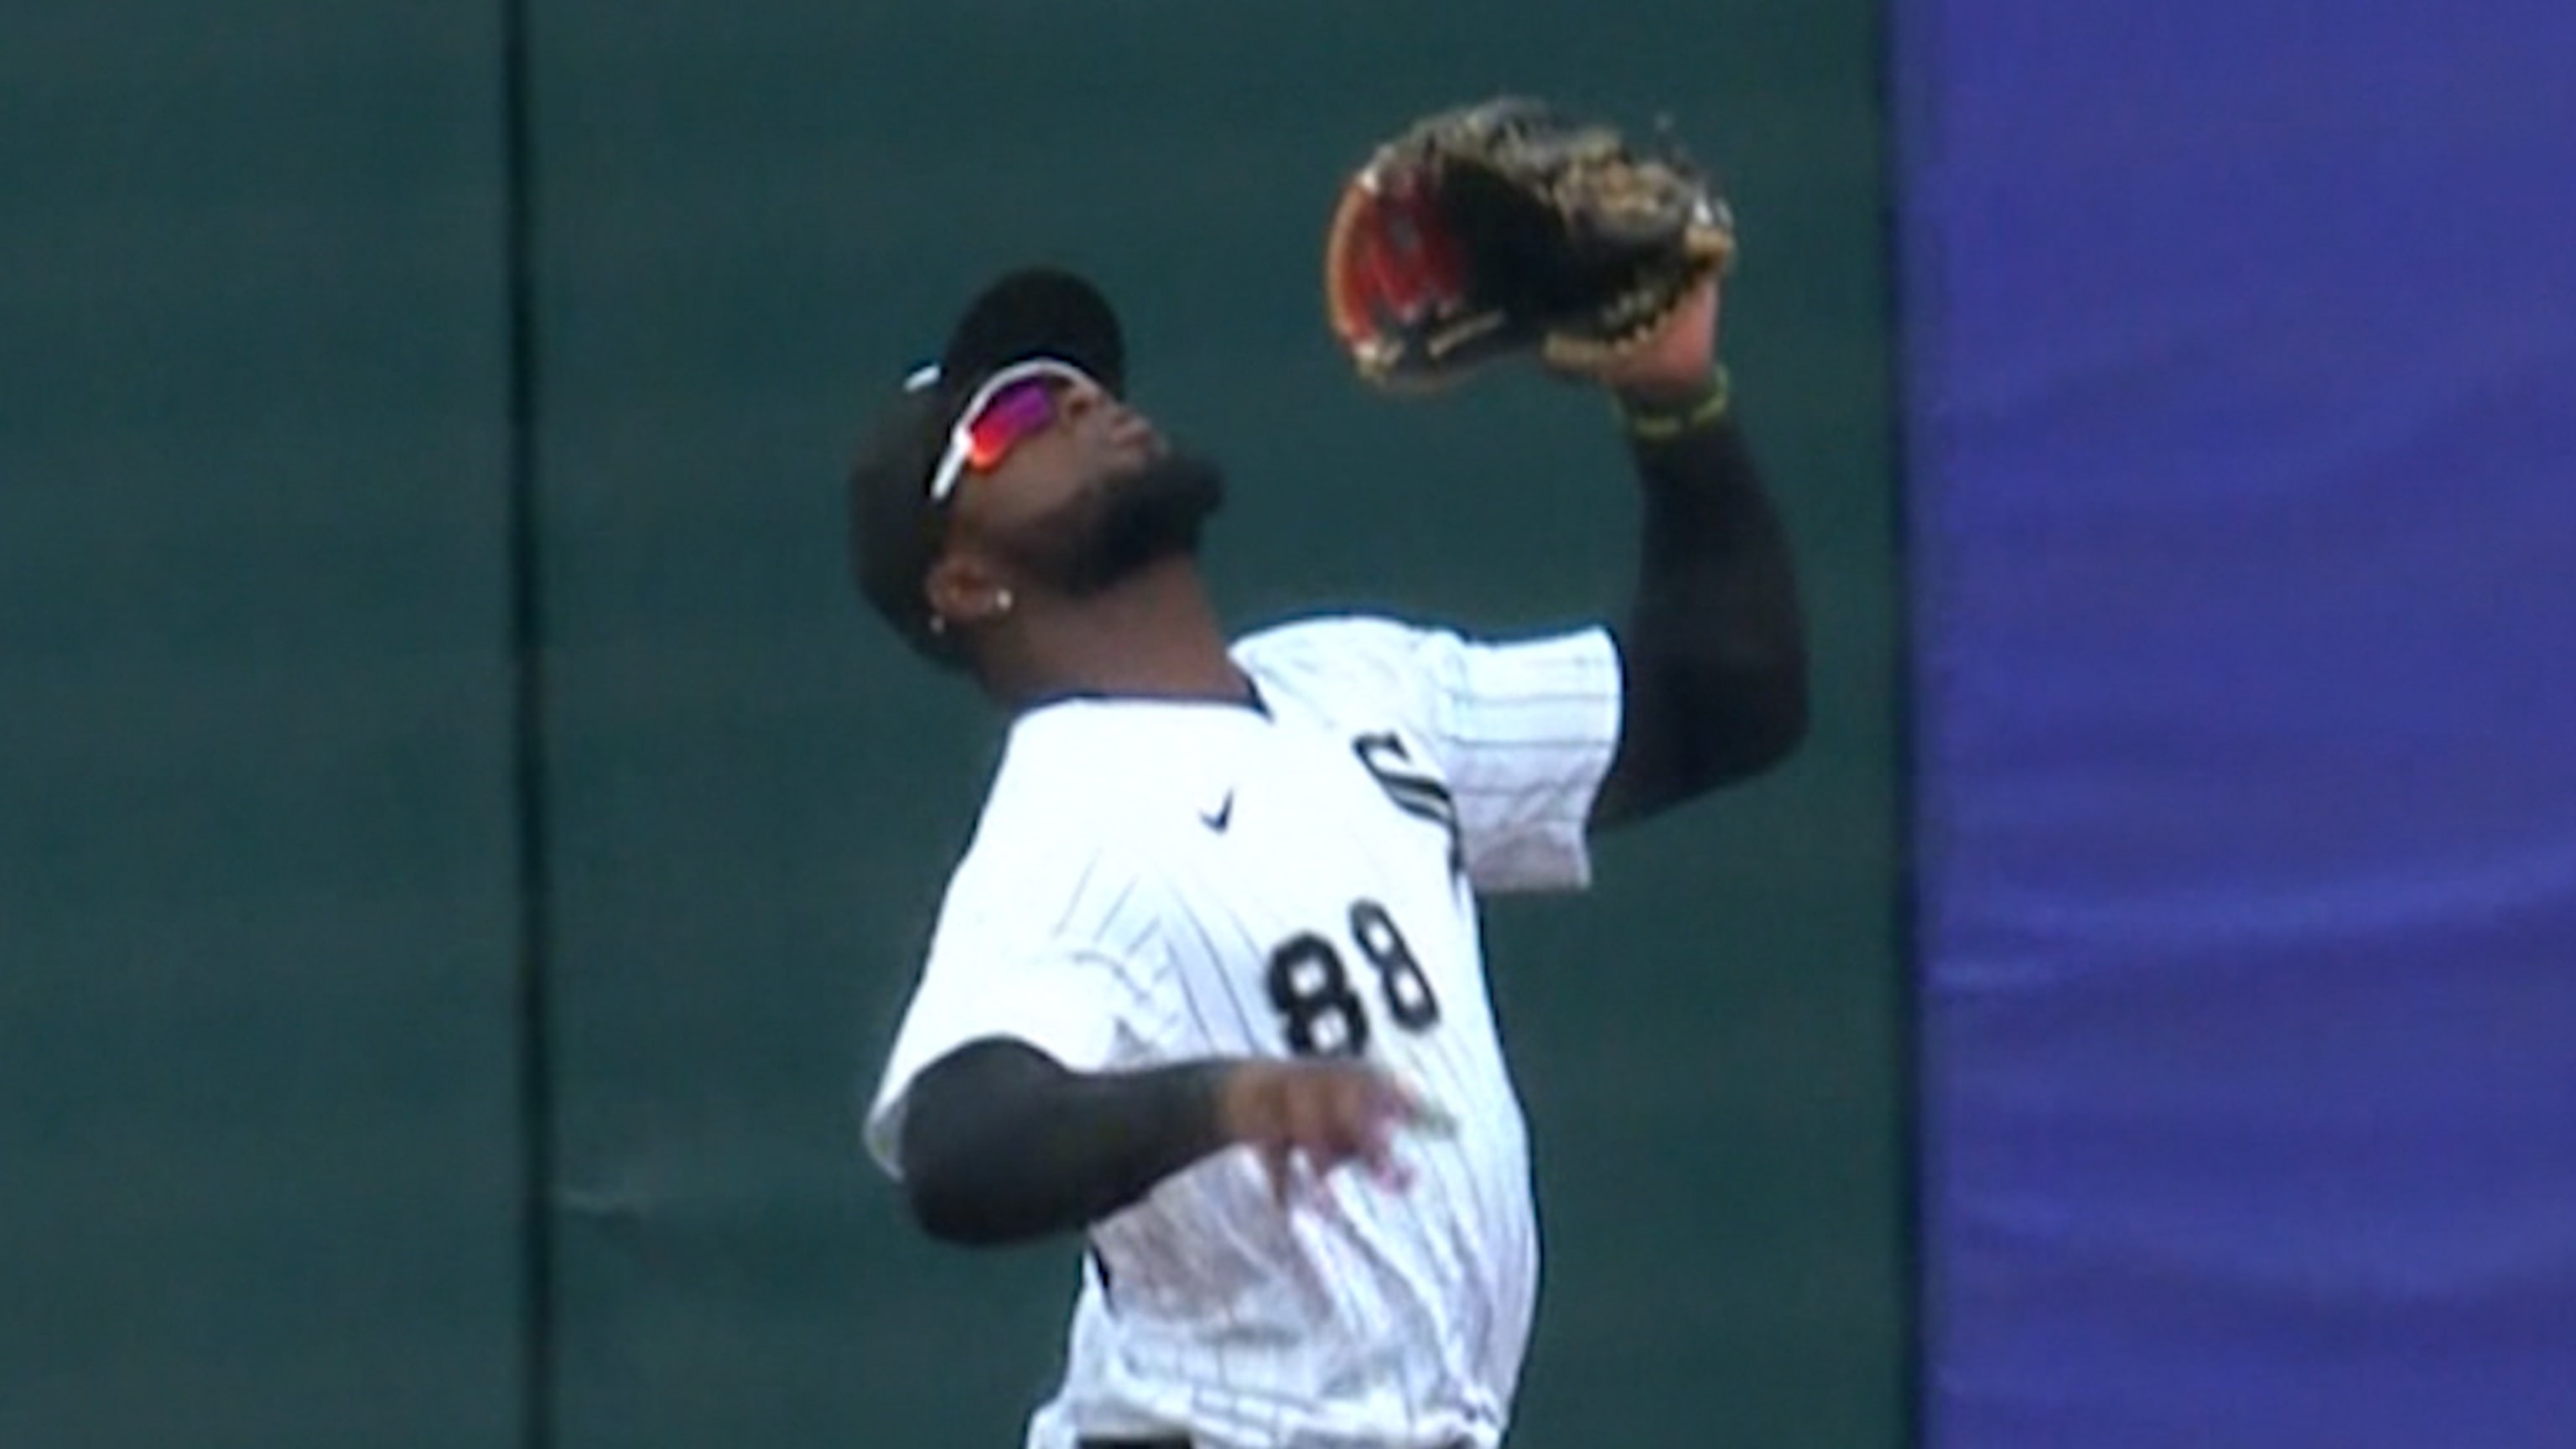 Chicago White Sox: 2022 player grade for Luis Robert